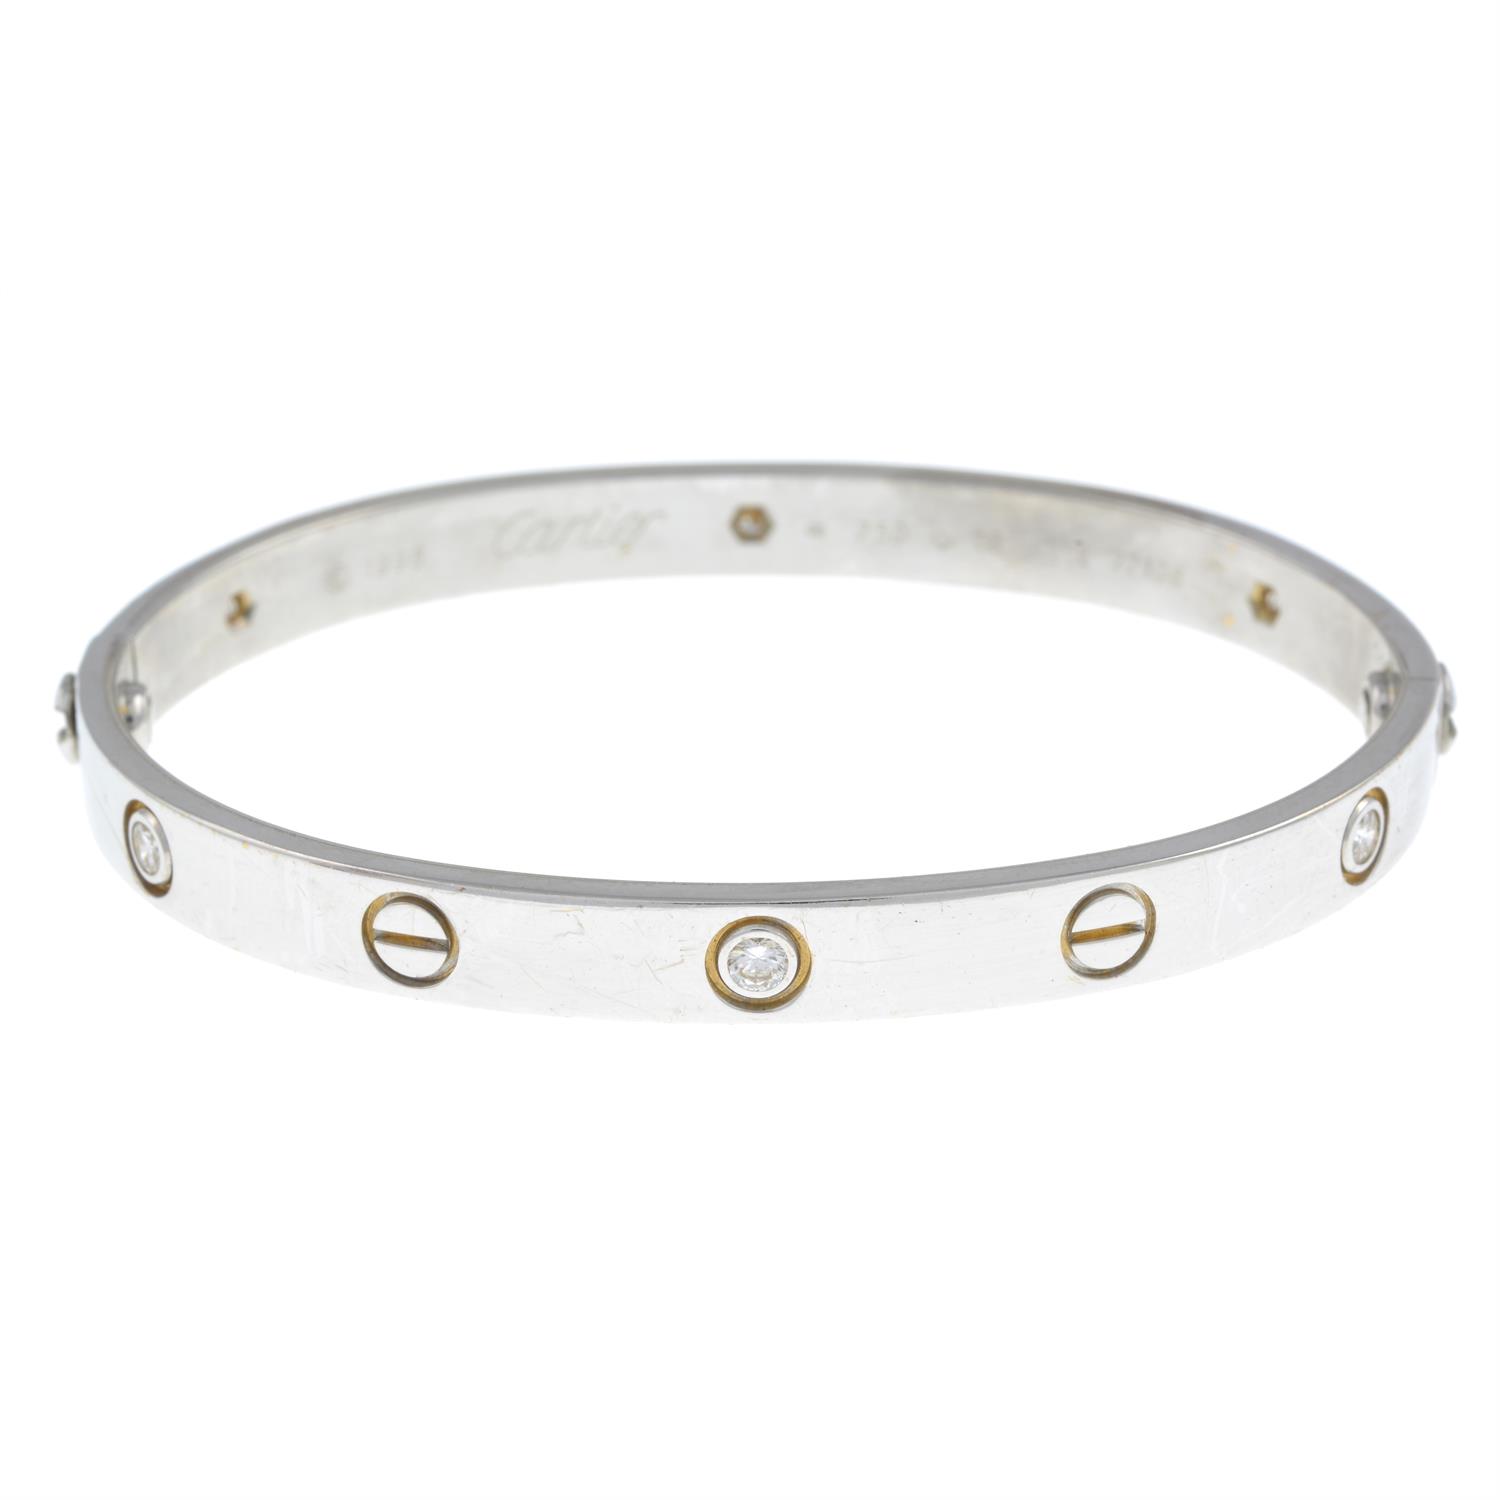 18ct gold diamond 'Love' bangle, by Cartier - Image 2 of 6